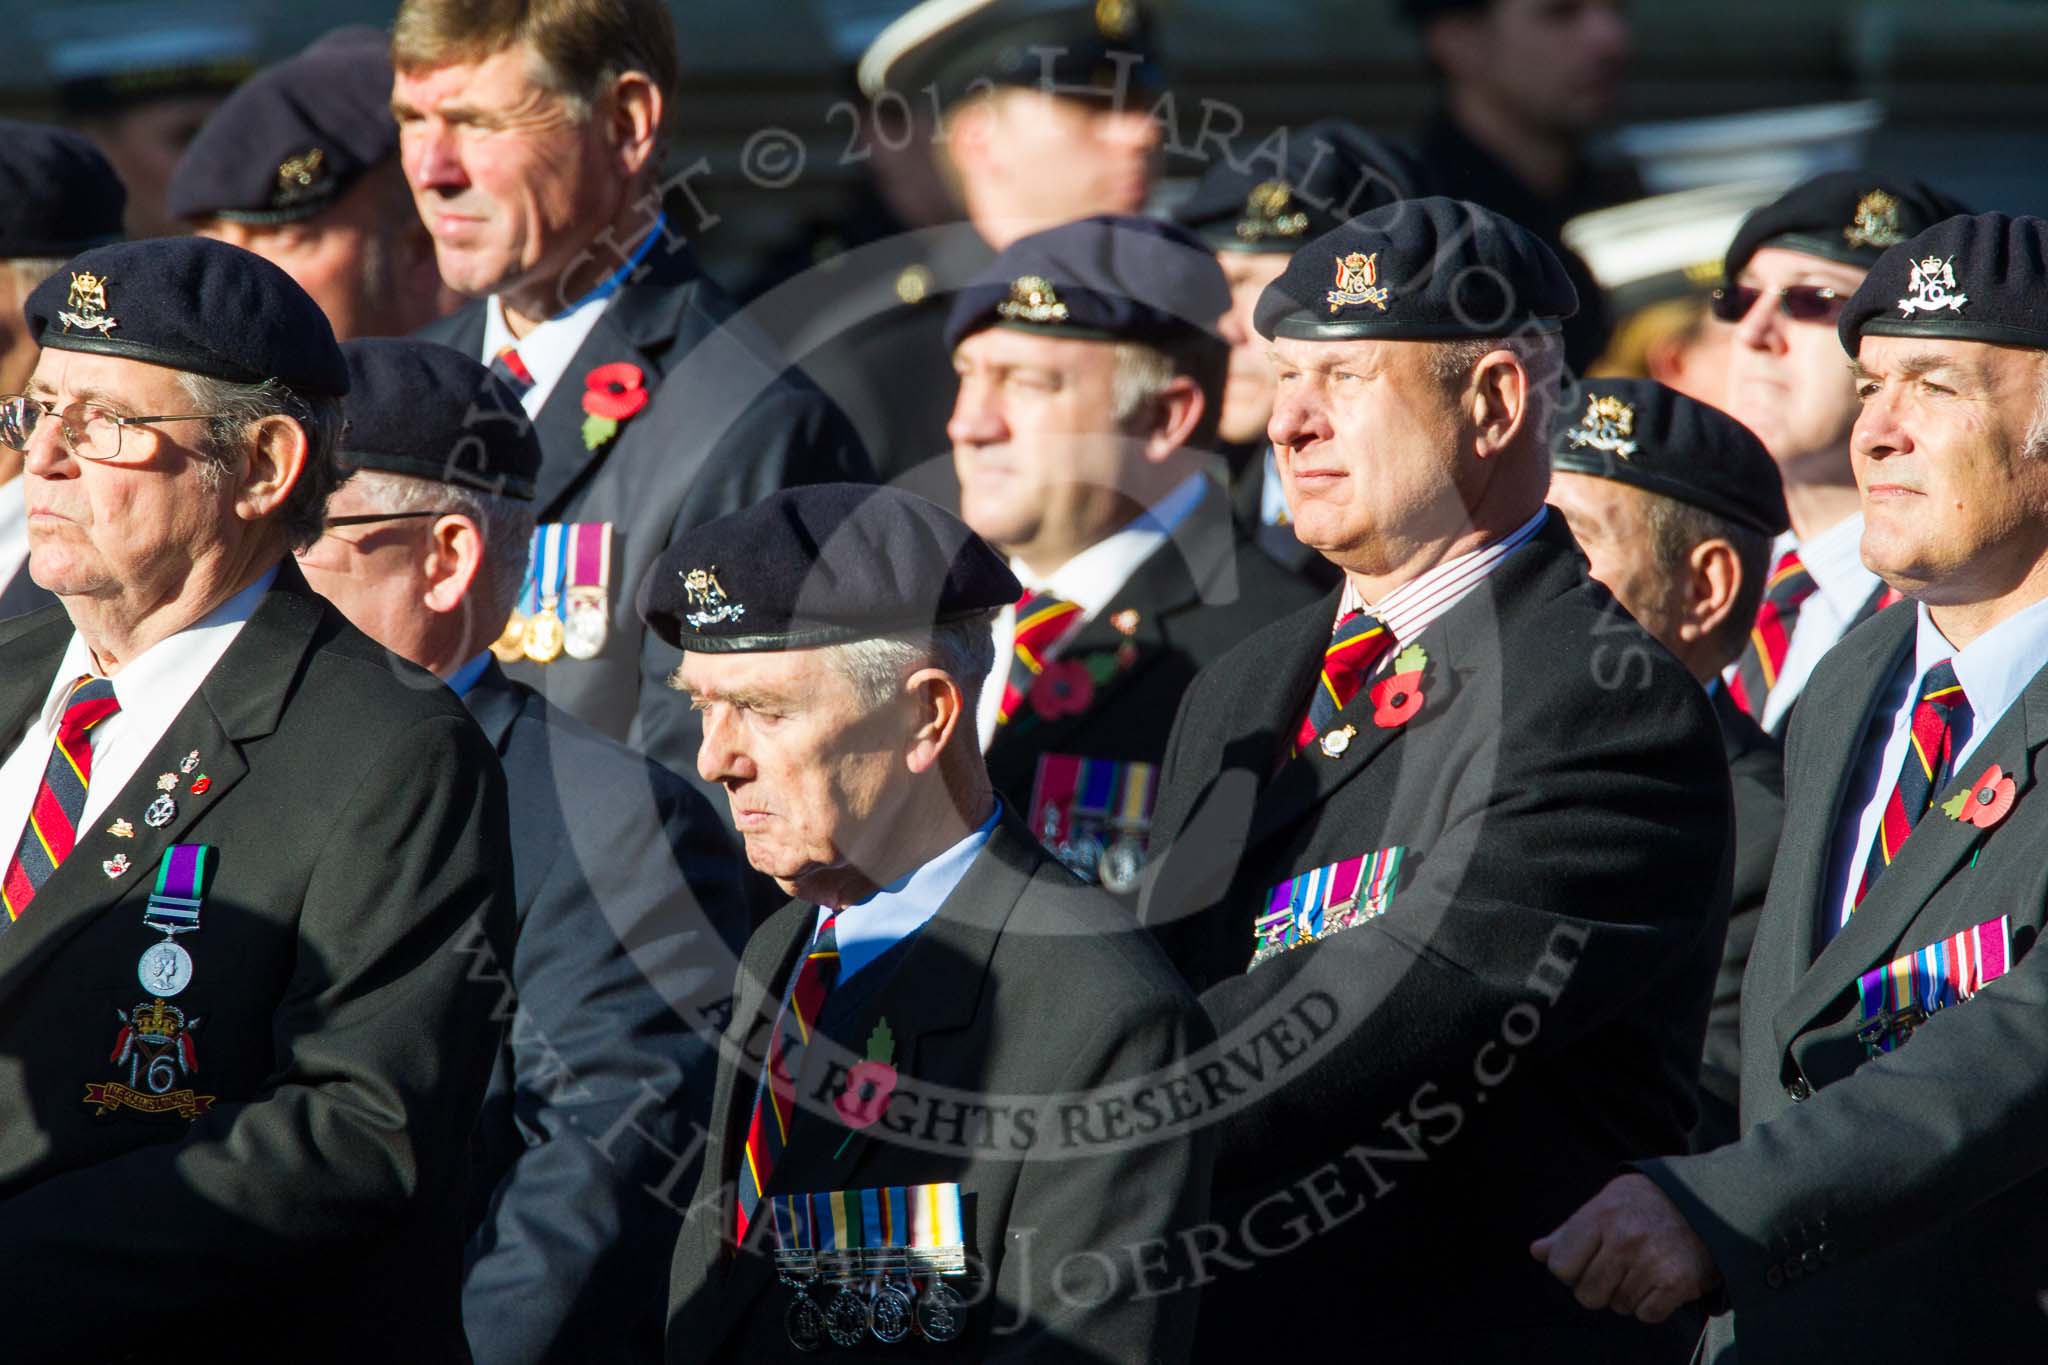 Remembrance Sunday at the Cenotaph in London 2014: Group B30 - 16/5th Queen's Royal Lancers.
Press stand opposite the Foreign Office building, Whitehall, London SW1,
London,
Greater London,
United Kingdom,
on 09 November 2014 at 12:13, image #1897